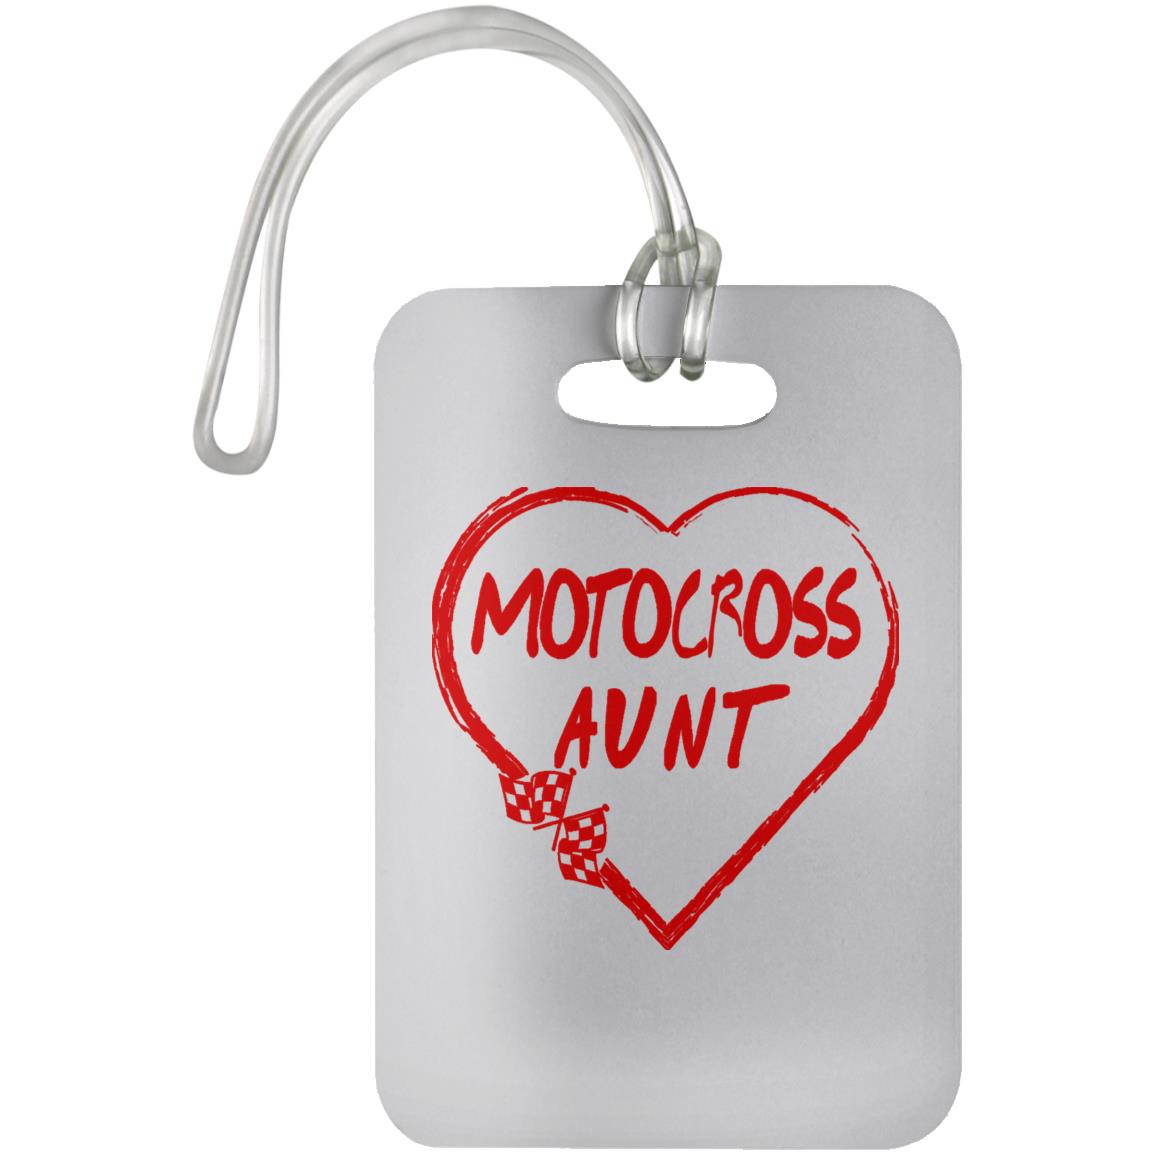 Motocross Aunt Heart Luggage Bag Tag